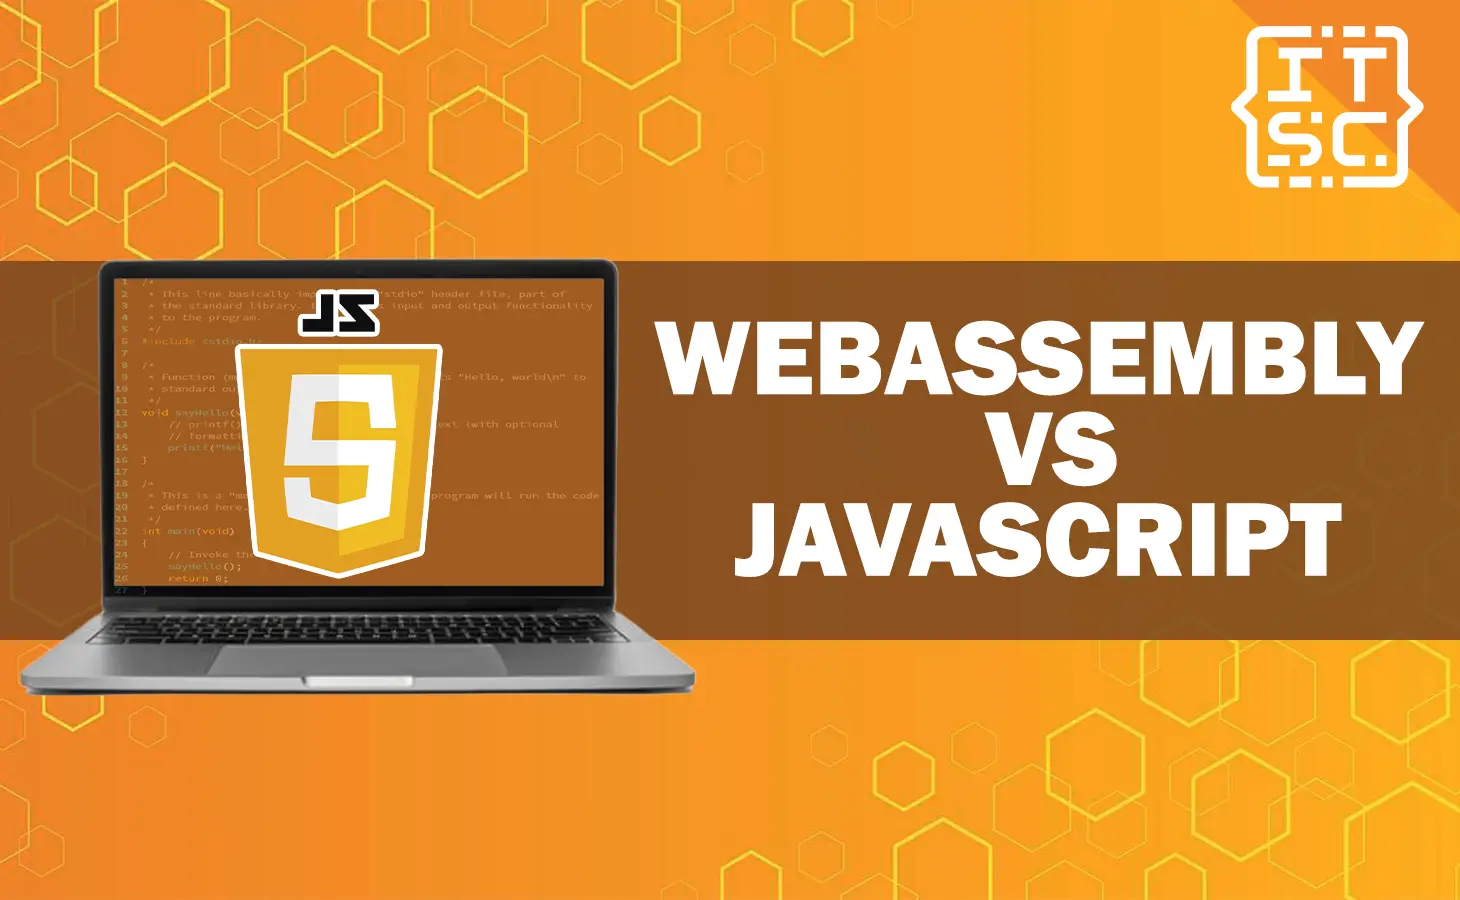 WebAssembly vs JavaScript Performance: Which one is better?